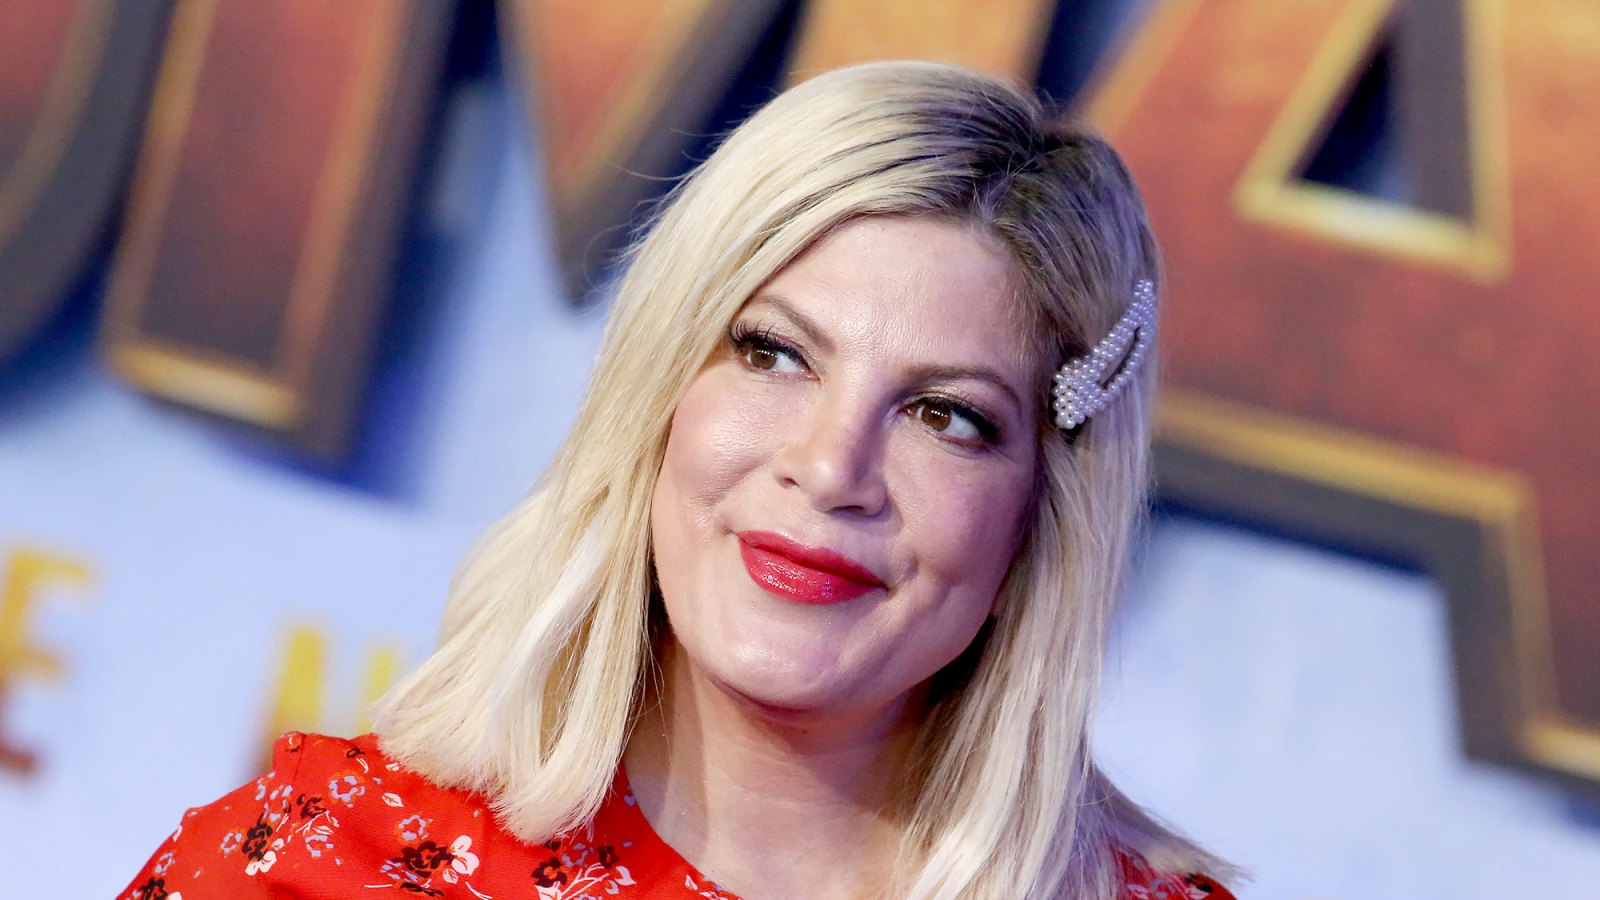 Tori Spelling could never be a housewife